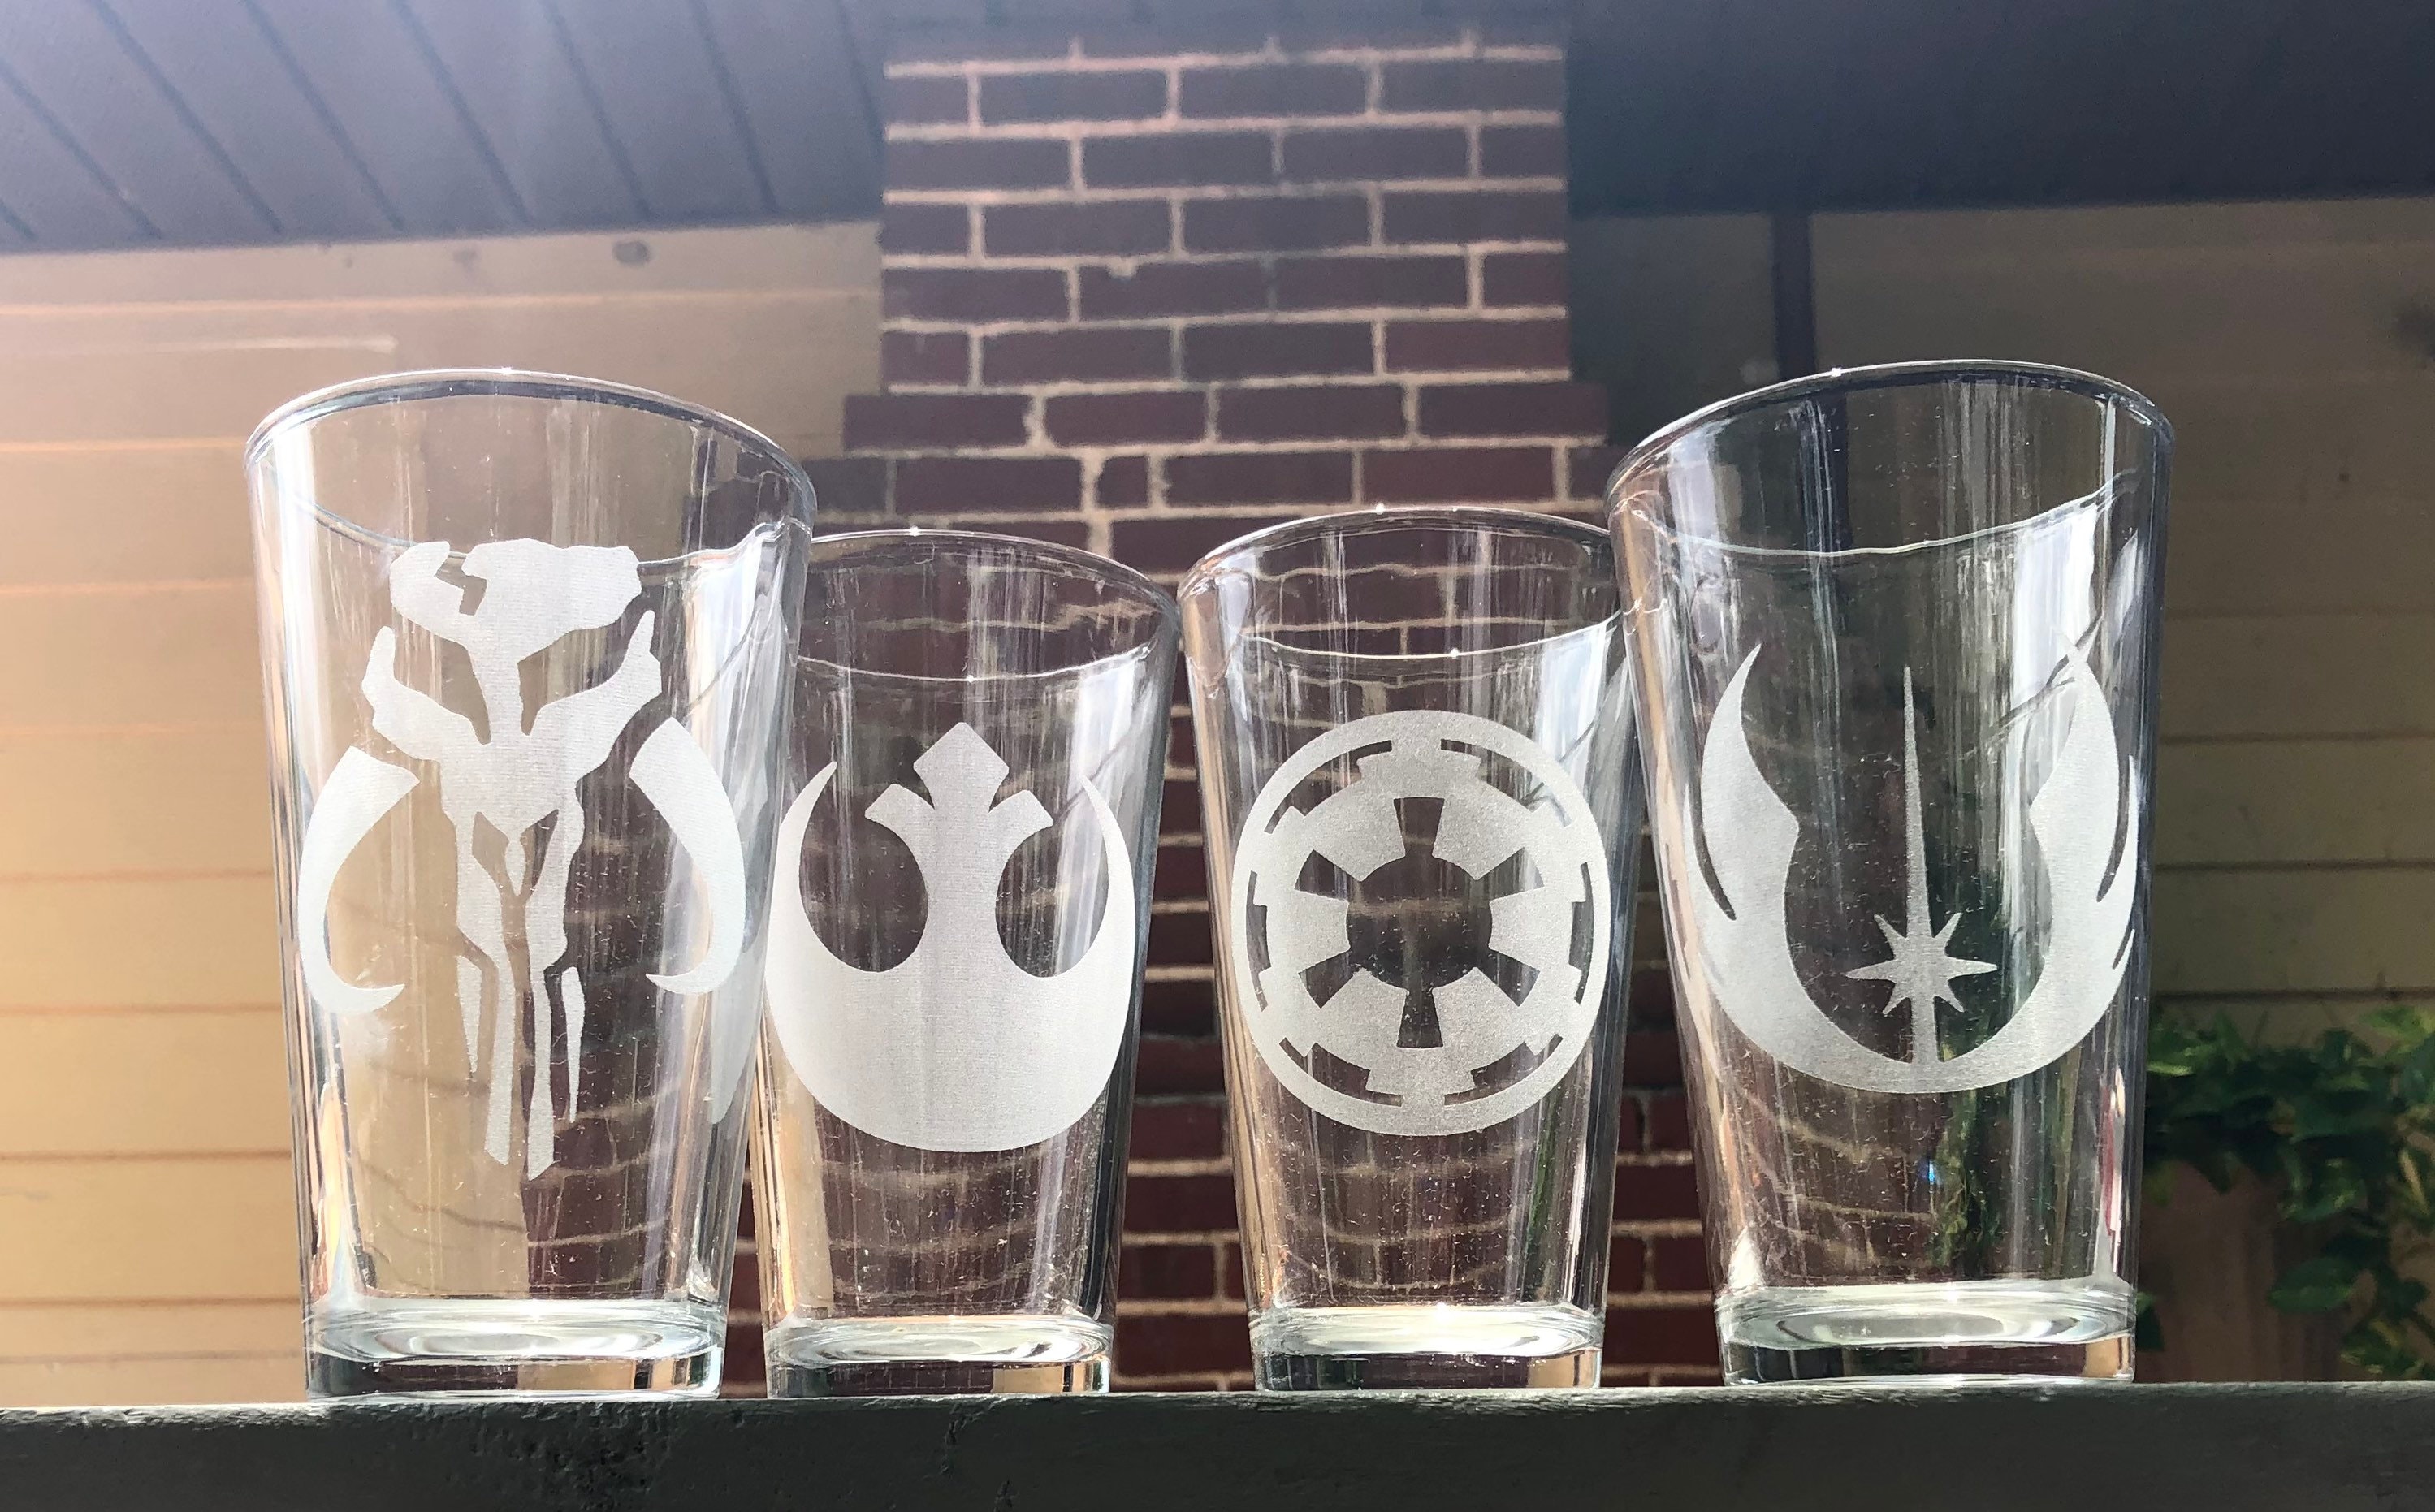 Personalized Star Wars Pint Glass Tumbler Beer Glass Full Color